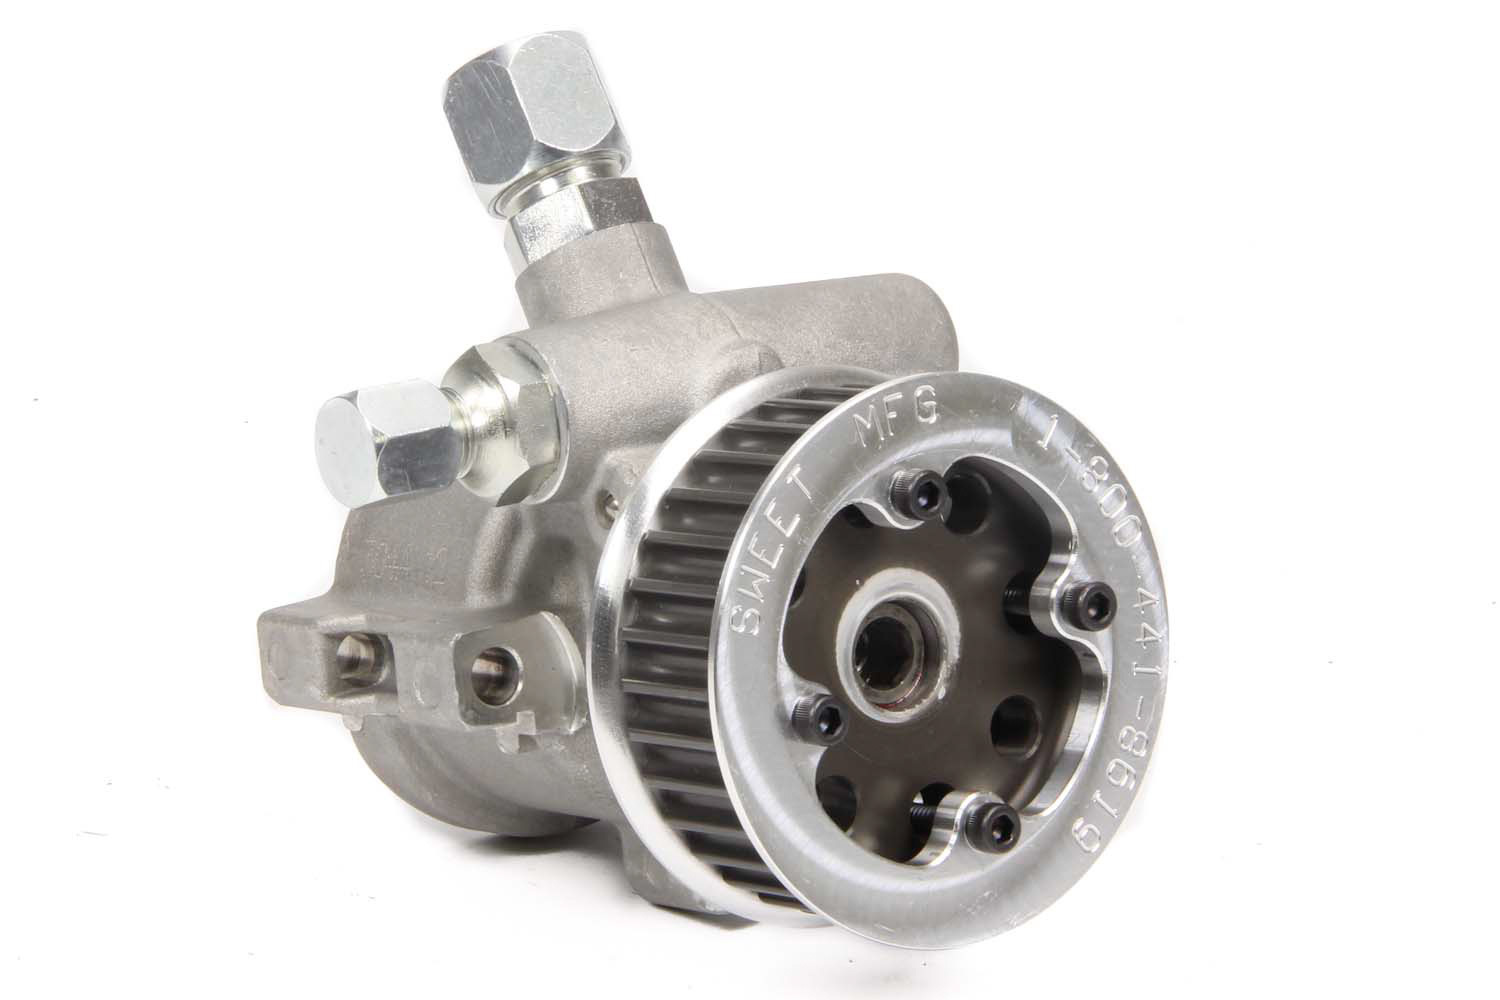 Sweet Manufacturing 305-60339 Power Steering Pump, GM Type 2, 3 gpm, 1300 psi, HTD Pulley Included, Aluminum, Natural, Each